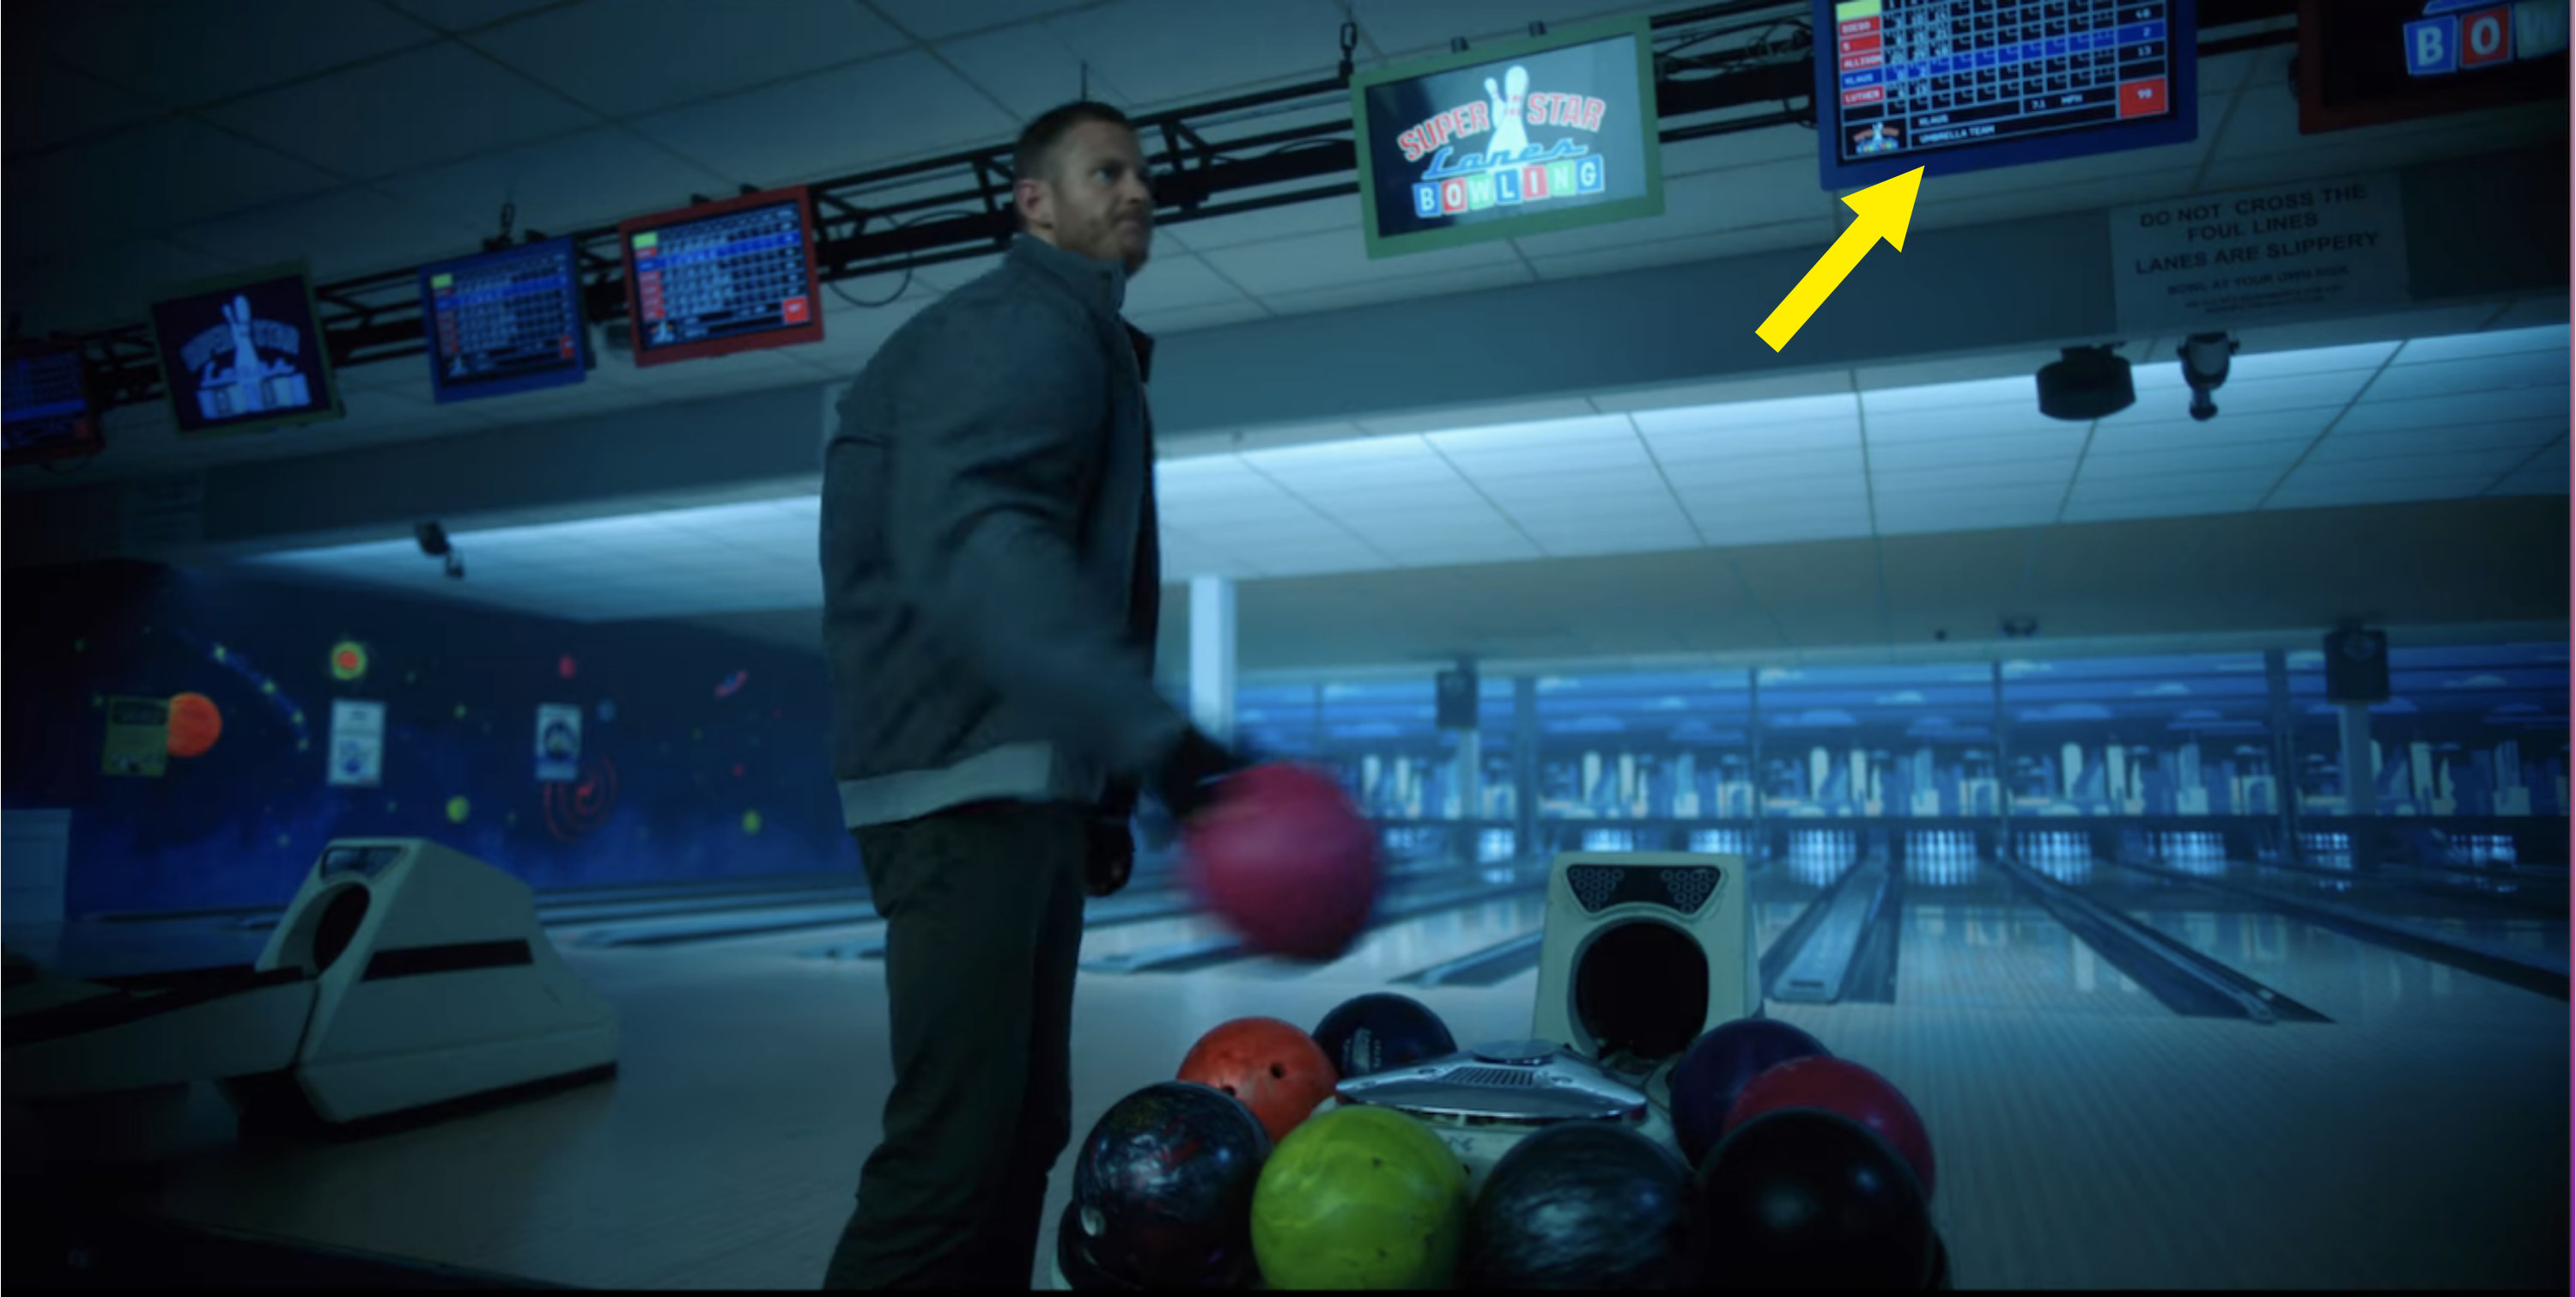 a person bowling and an arrow pointing to the TV with the scores on it